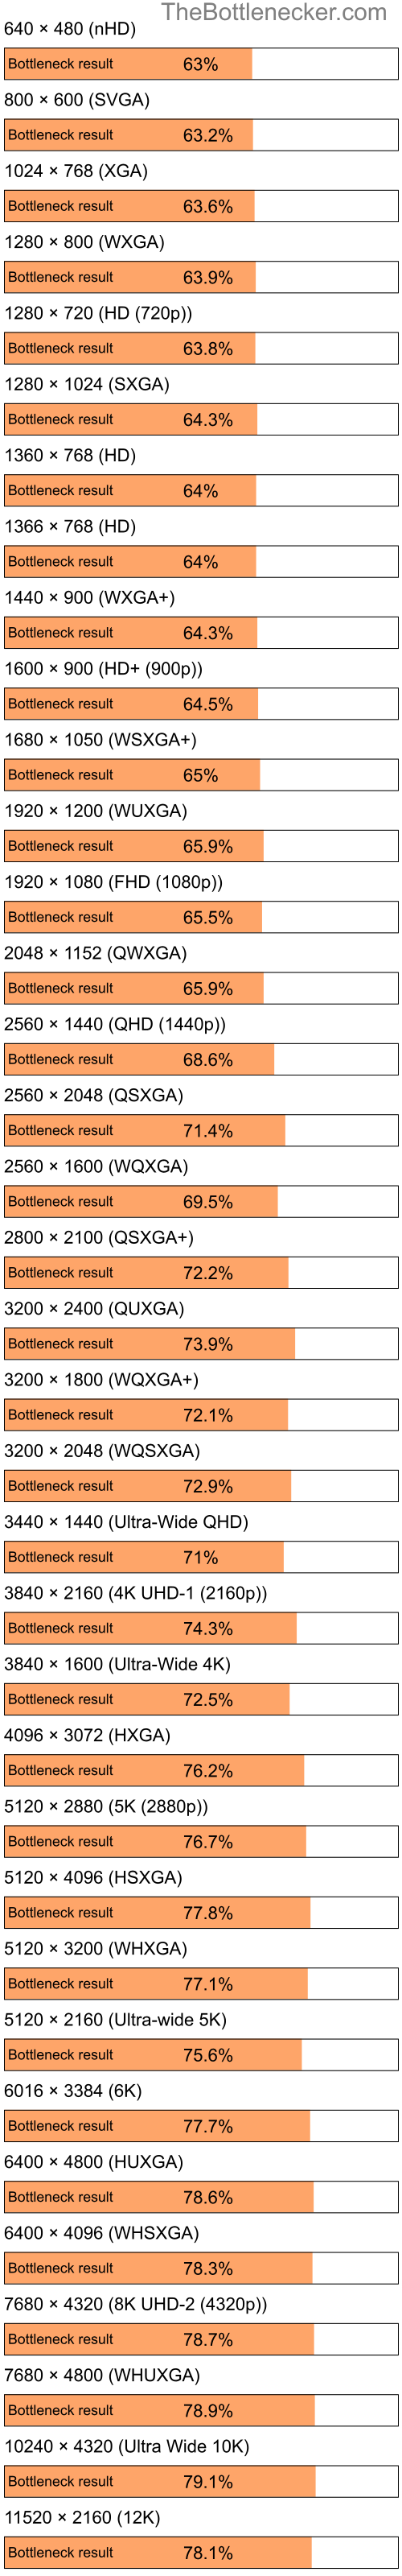 Bottleneck results by resolution for Intel Celeron M 410 and AMD Radeon X800 GTO in General Tasks